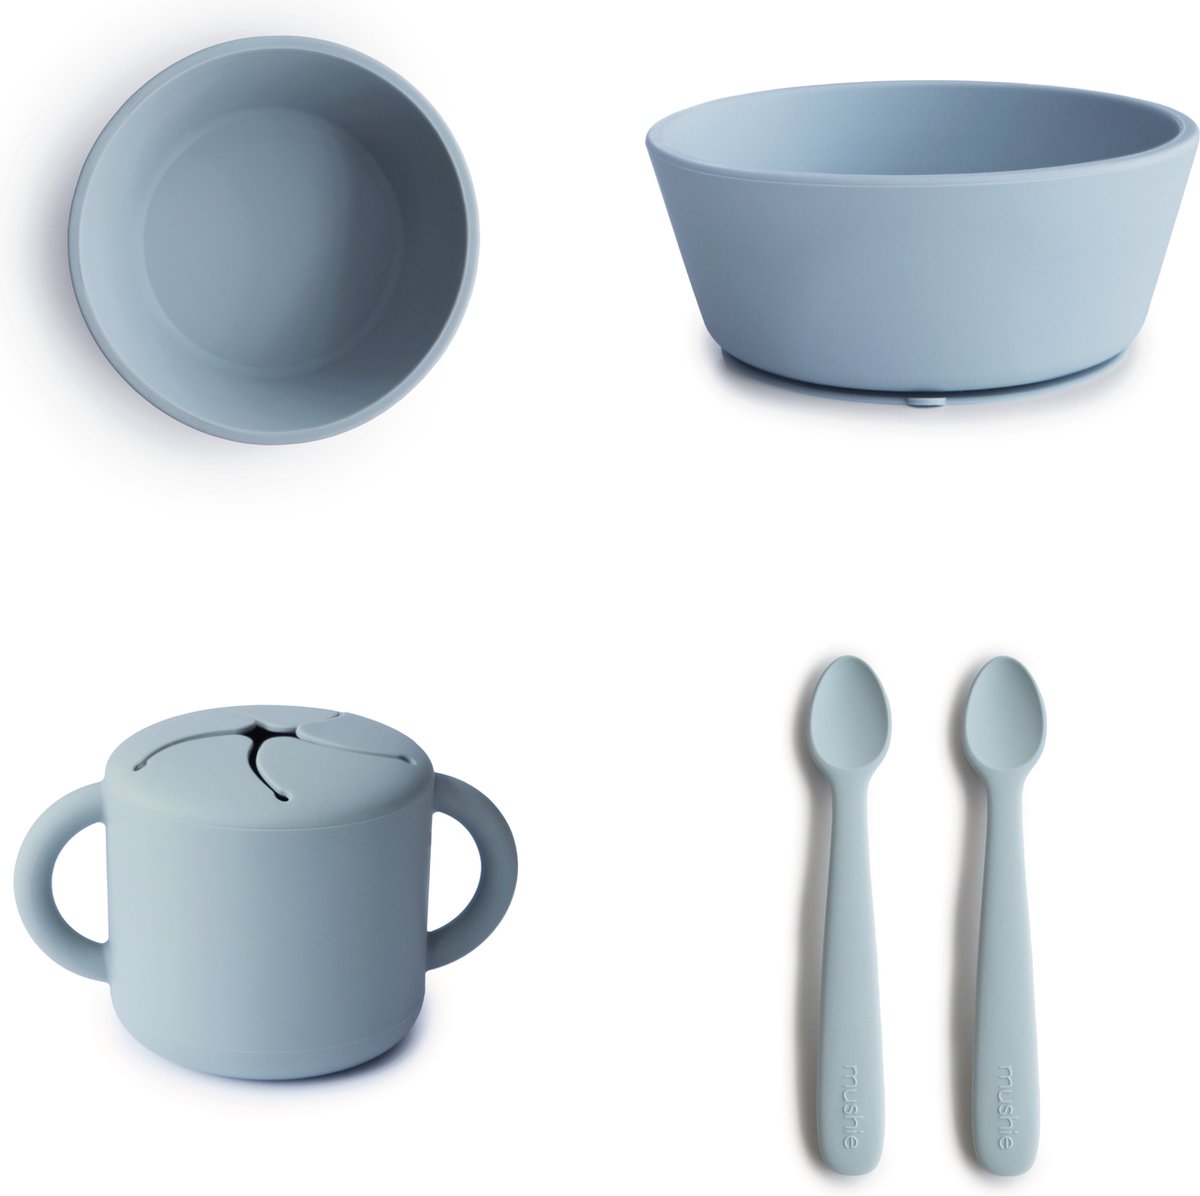 Mushie Dinner Set | Silicone Bowl, Snack Cup and Spoons set | Powder Blue | Silicone Kinderservies Set | Mushie Diner Set Silicone Kom, Snack cup en 2 Lepels | Lichtblauw